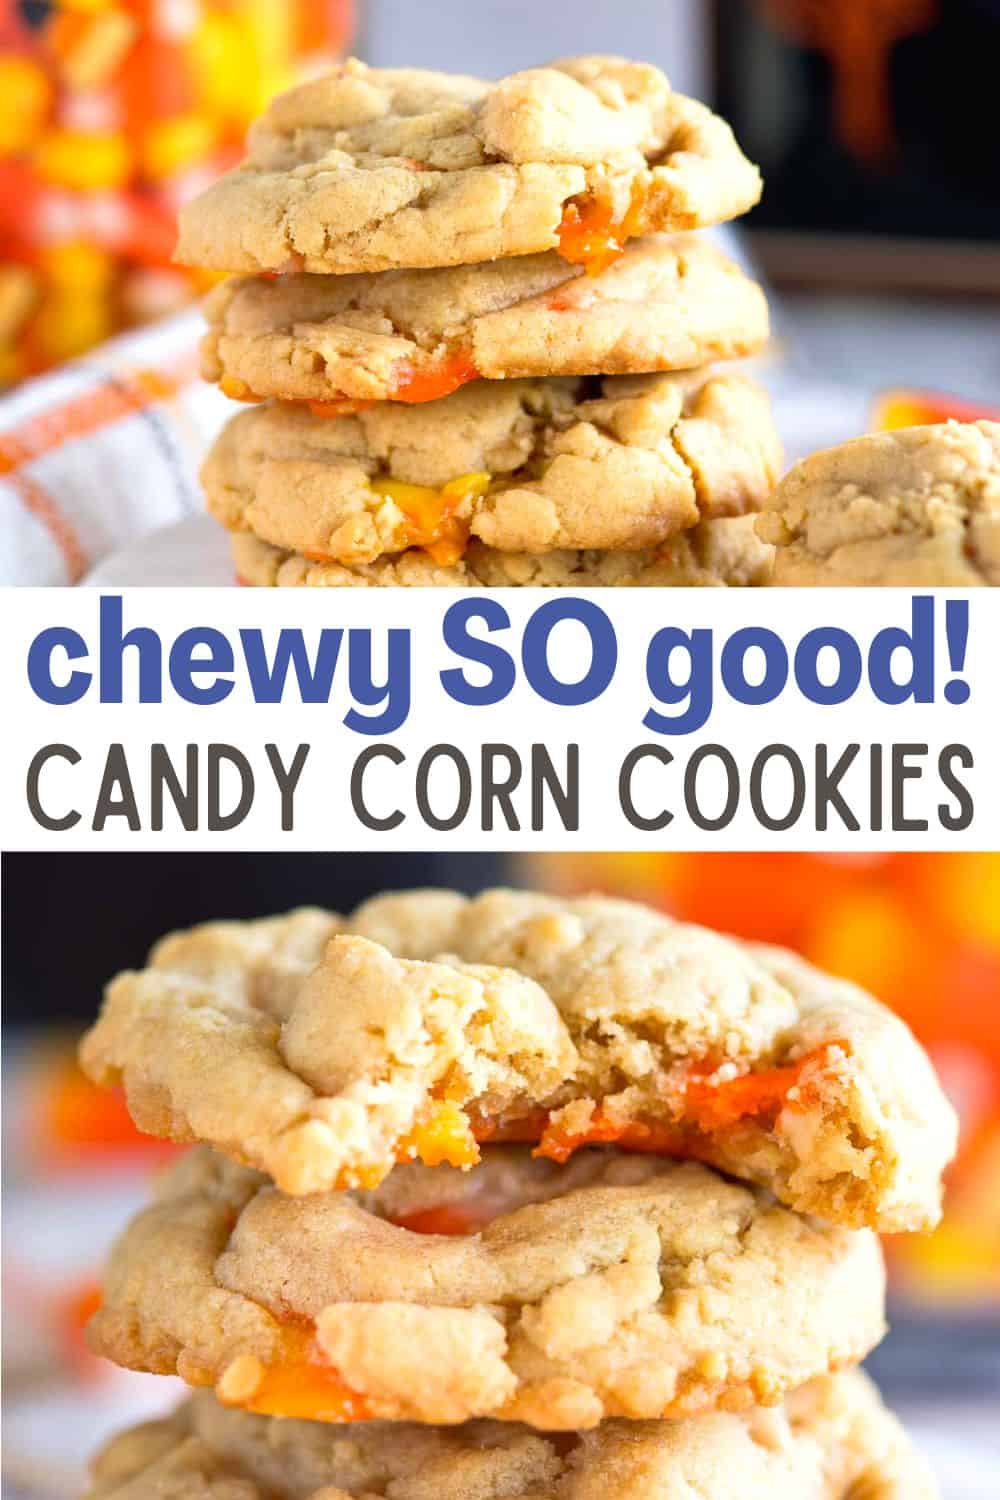 Peanuts and candy corn combined in one delicious Halloween cookie recipe! These peanut butter candy corn cookies are super easy to make and are the perfect sweet surprise for your little trick or treaters!